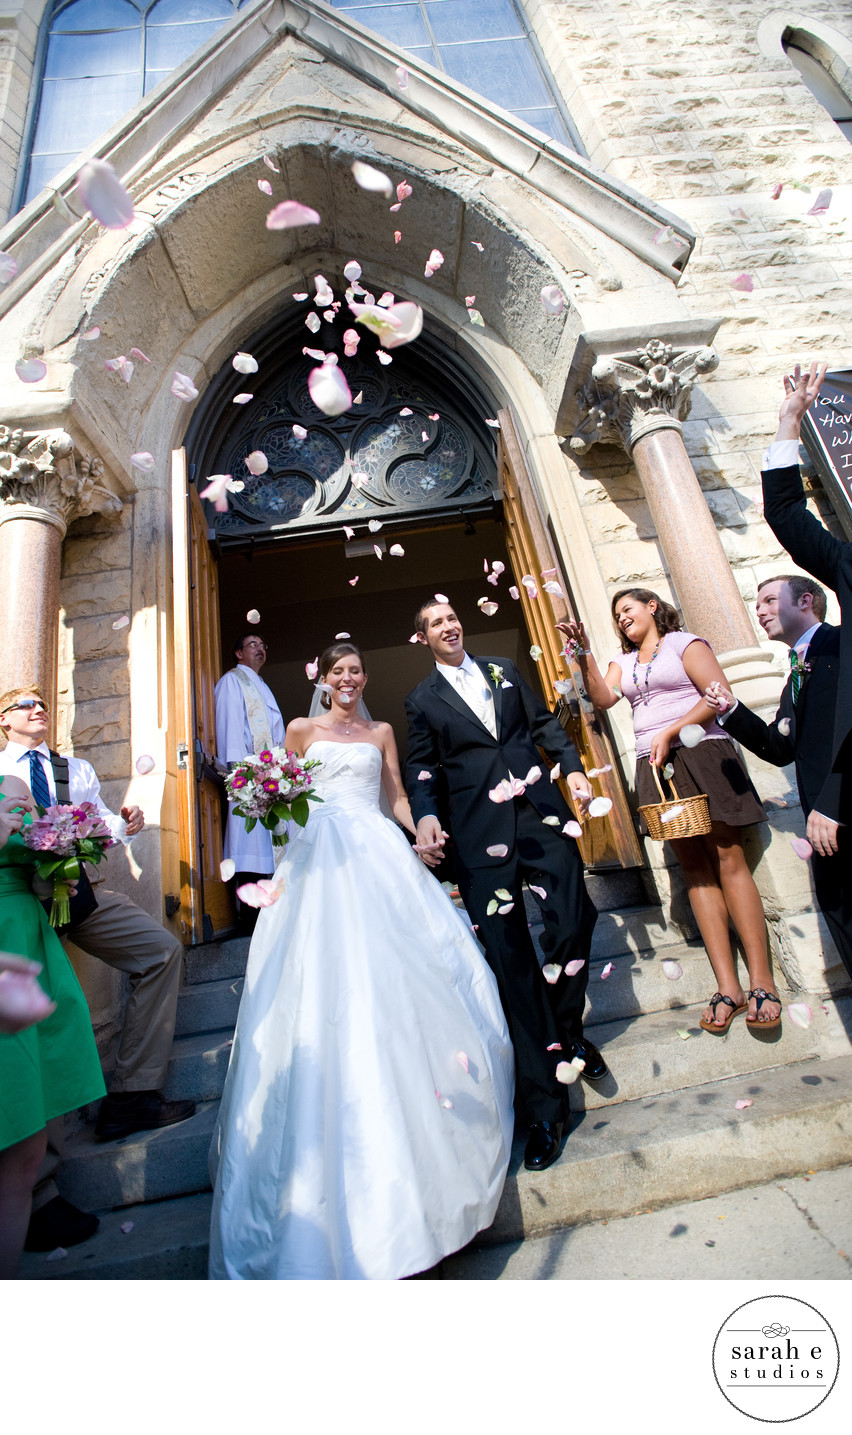 Church Exit in Chicago with Rose Petals